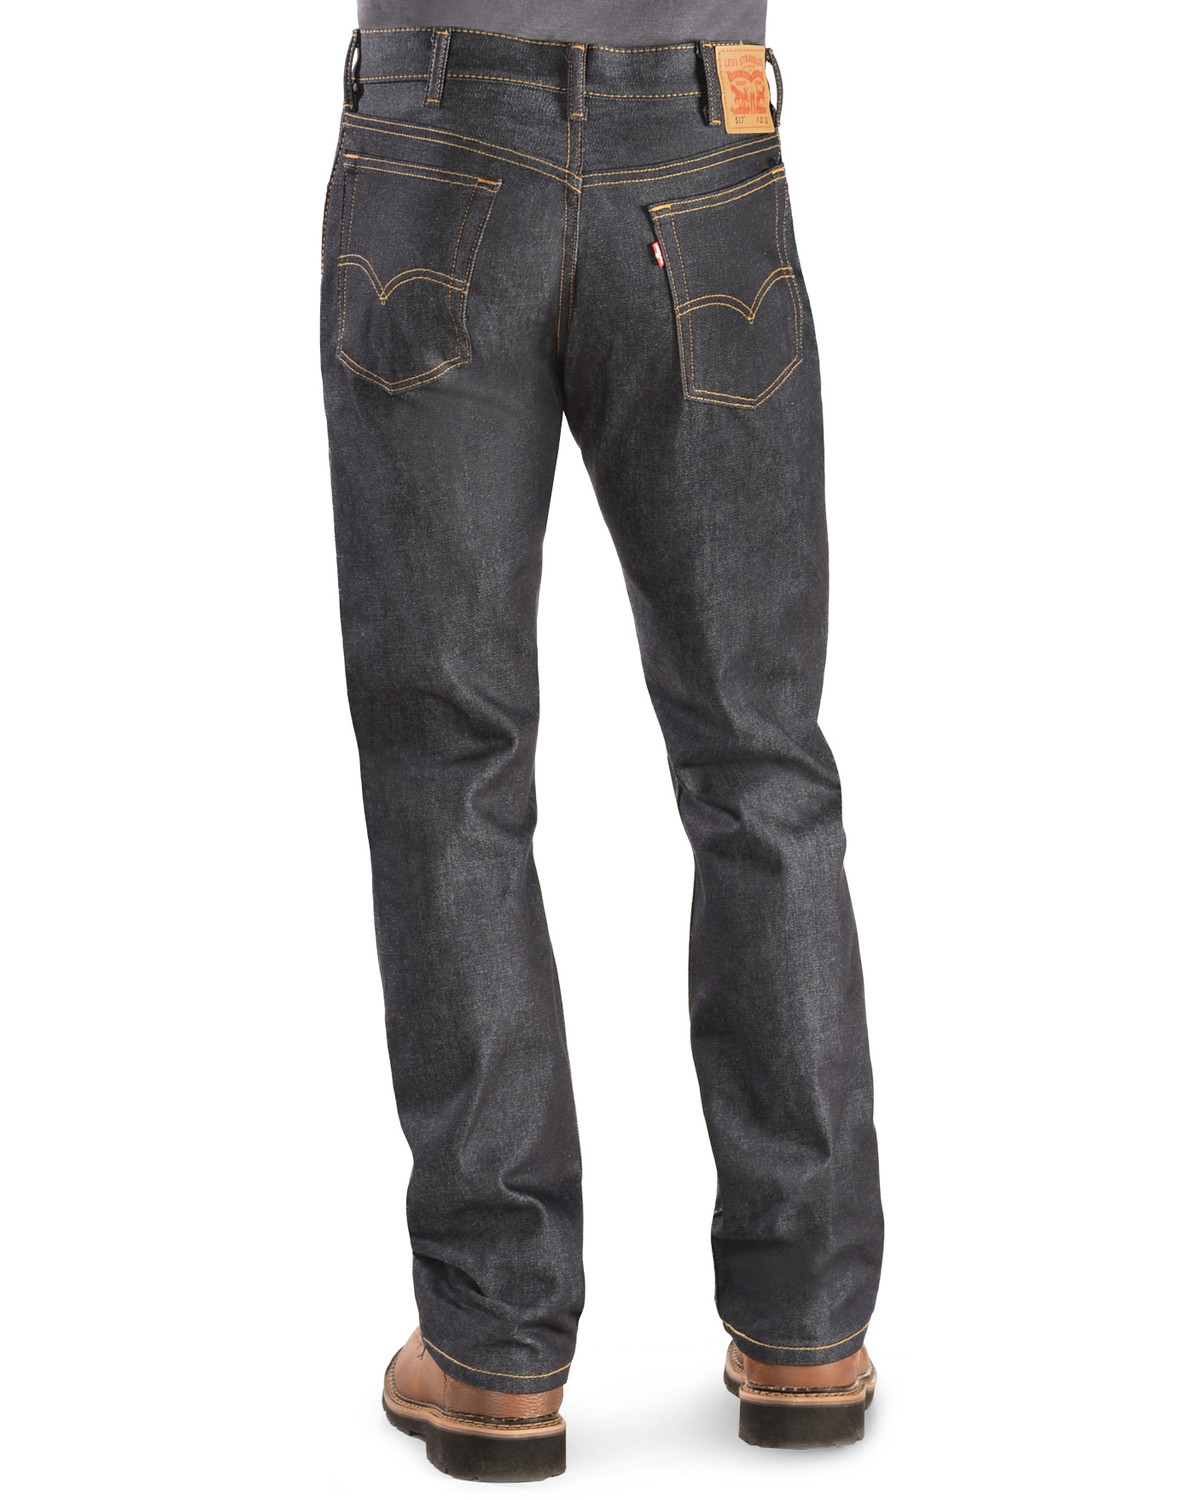 Levi's 517 Jeans - Rigid Boot Cut - Country Outfitter